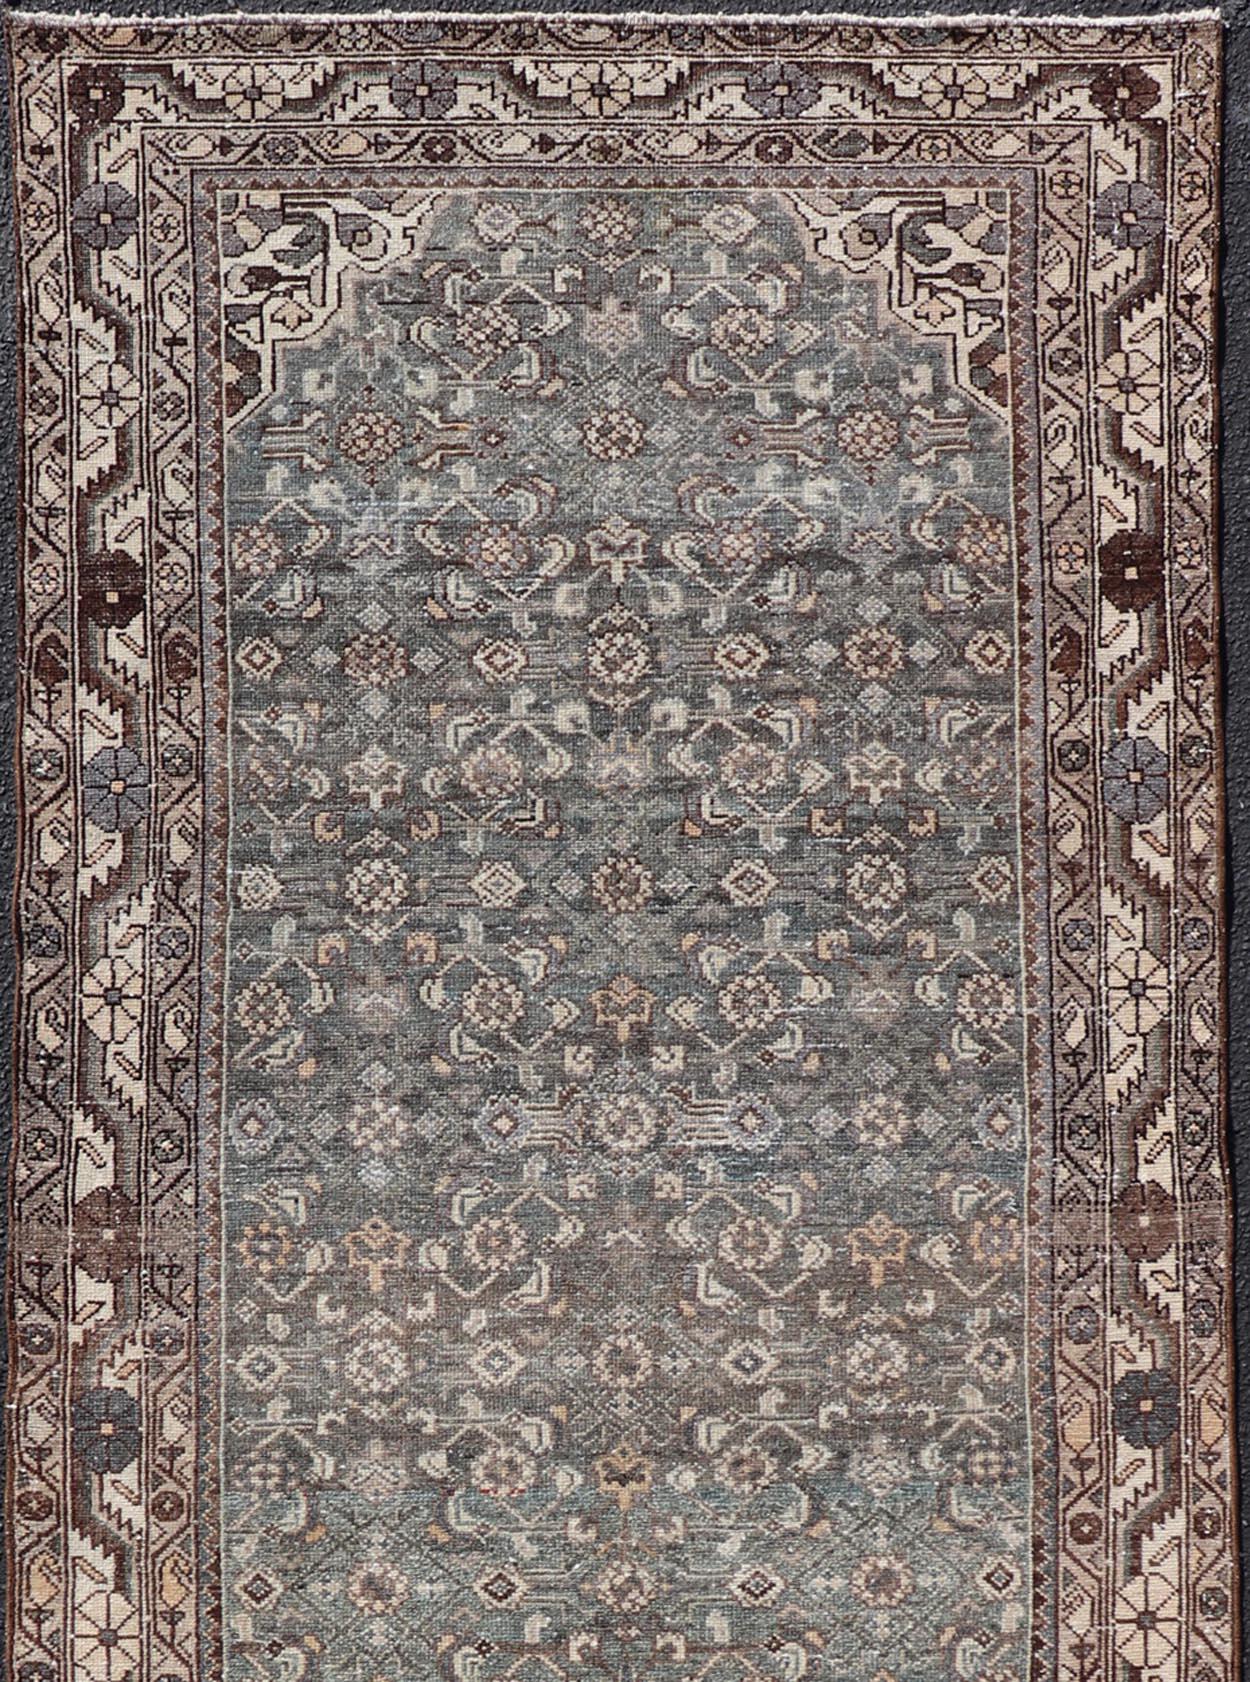 Antique Persian Malayer Runner with All over Herati Design in Blue and Brown In Good Condition For Sale In Atlanta, GA